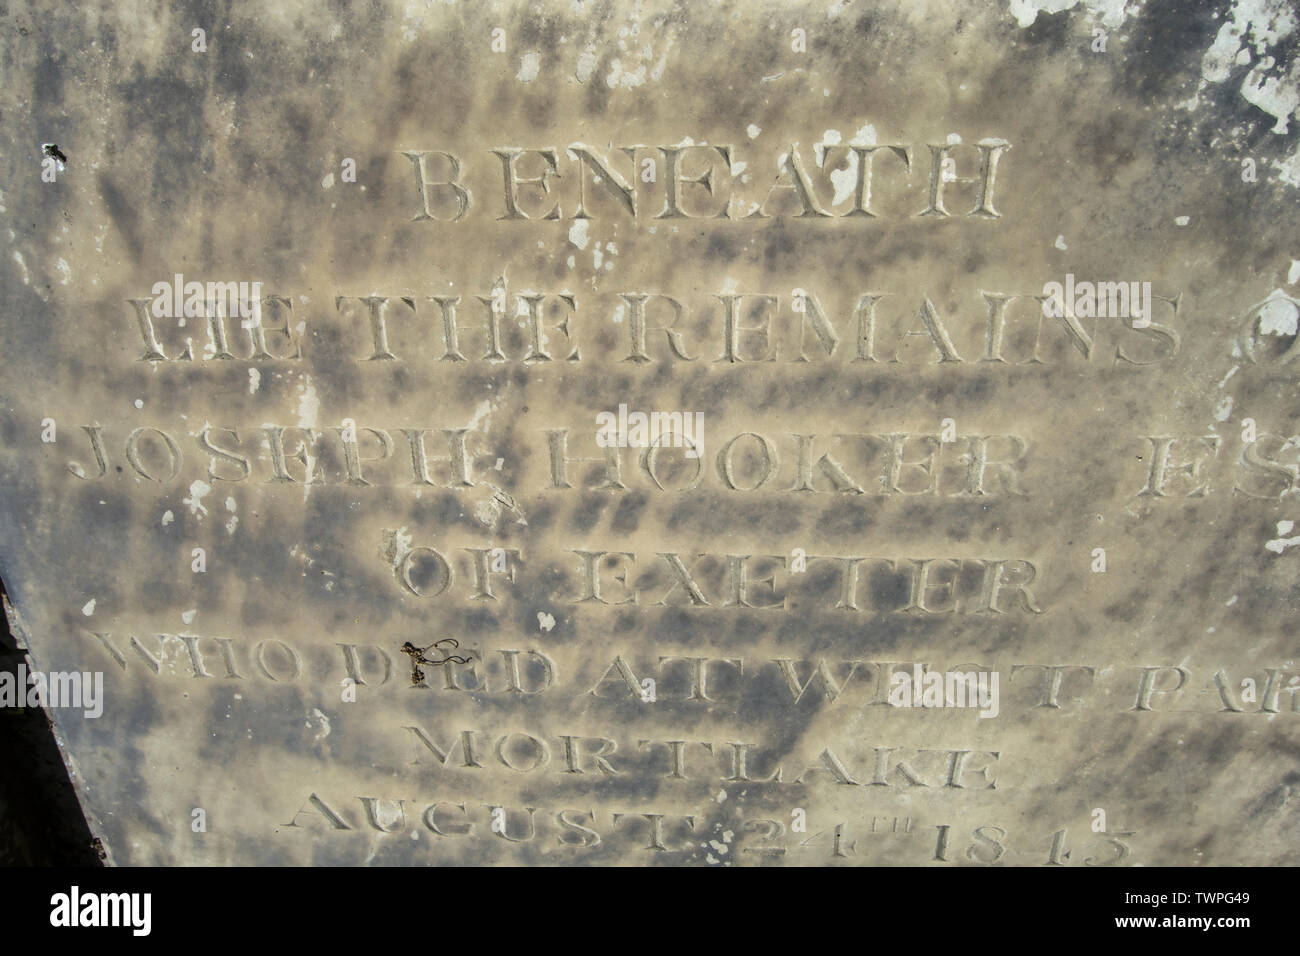 inscription on the grave of joseph hooker, 19th botanist and explorer, and director of kew gardens, in the hucrchyard of st annes church, kew, london Stock Photo